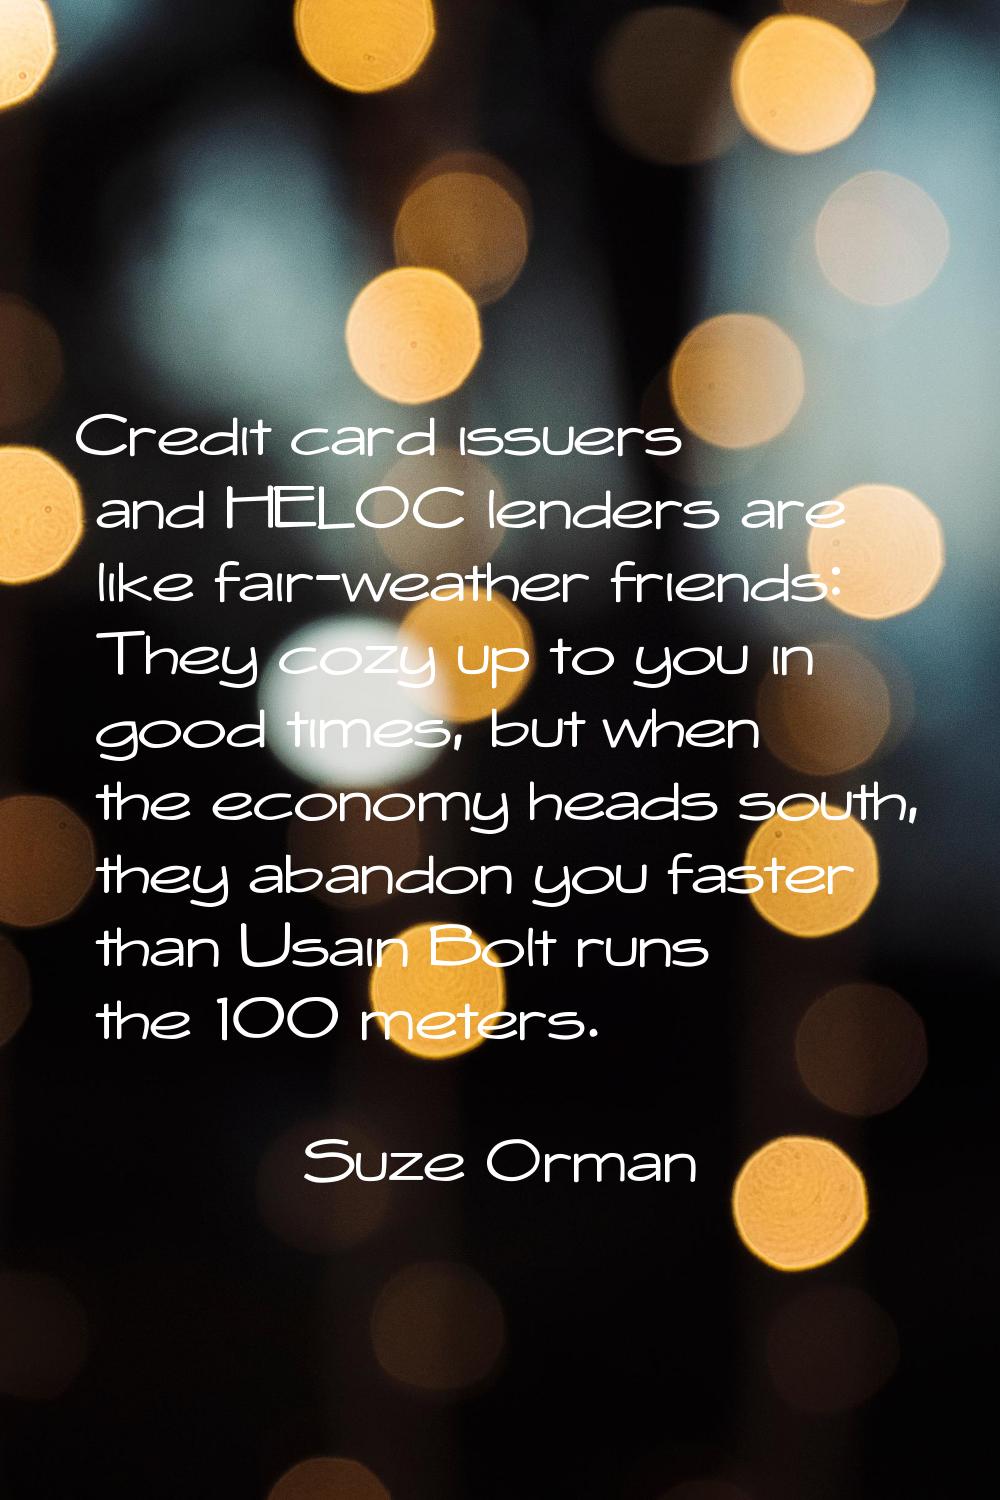 Credit card issuers and HELOC lenders are like fair-weather friends: They cozy up to you in good ti